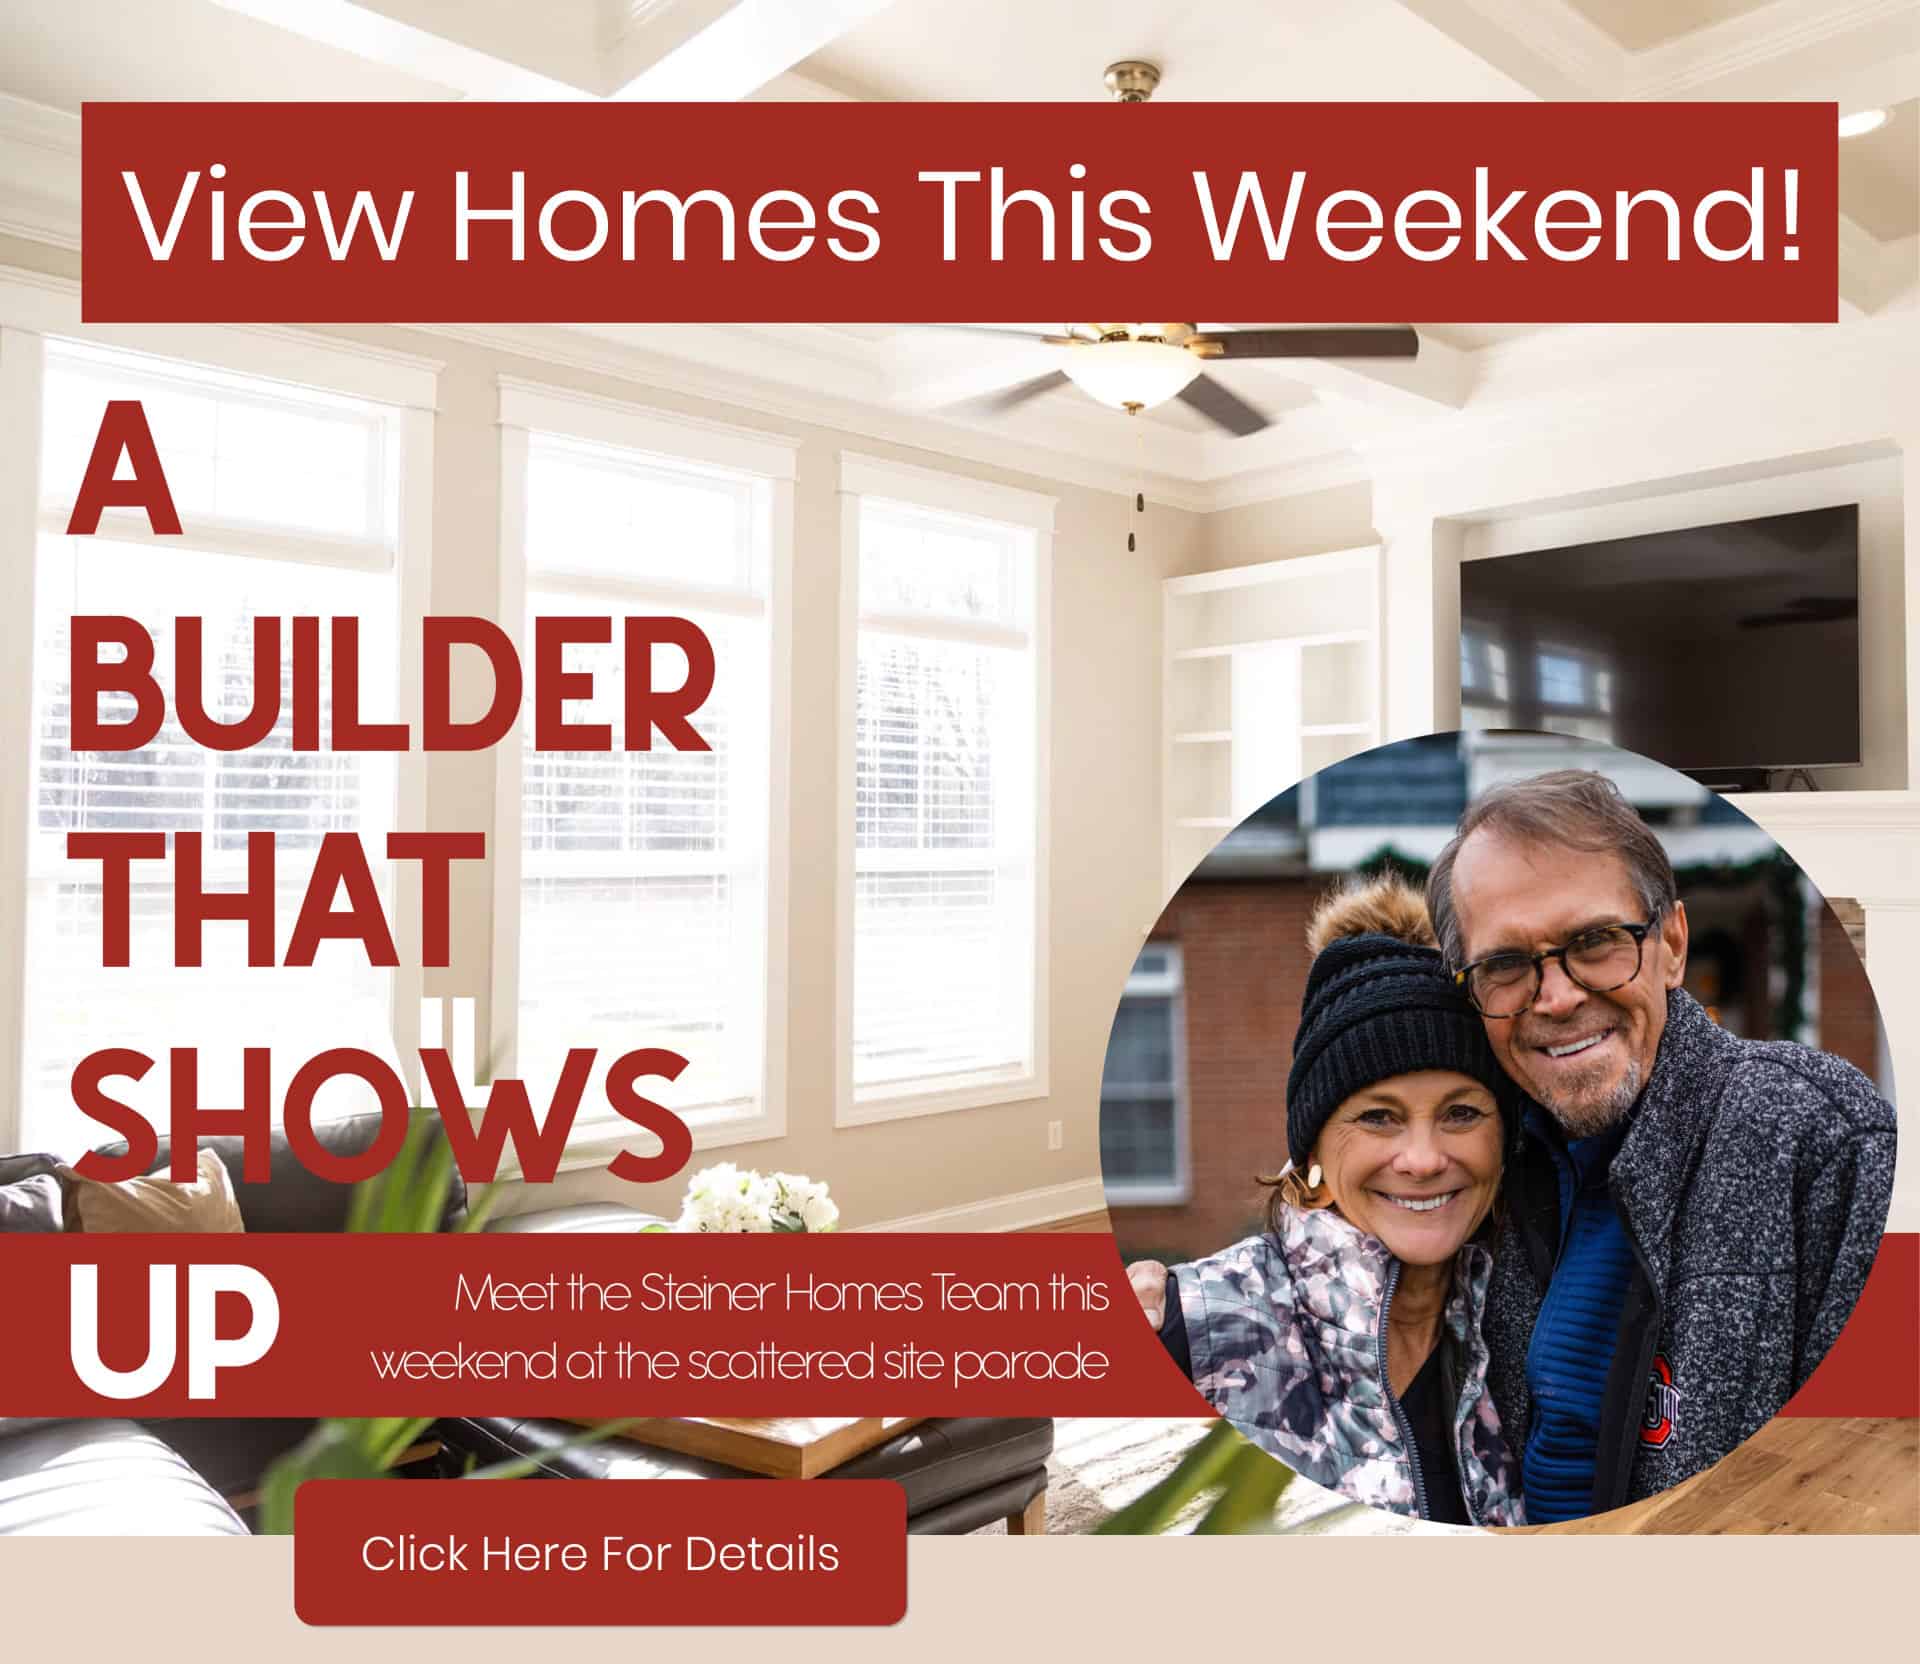 Scattered Site Parade Of Homes This Weekend- Steiner Homes